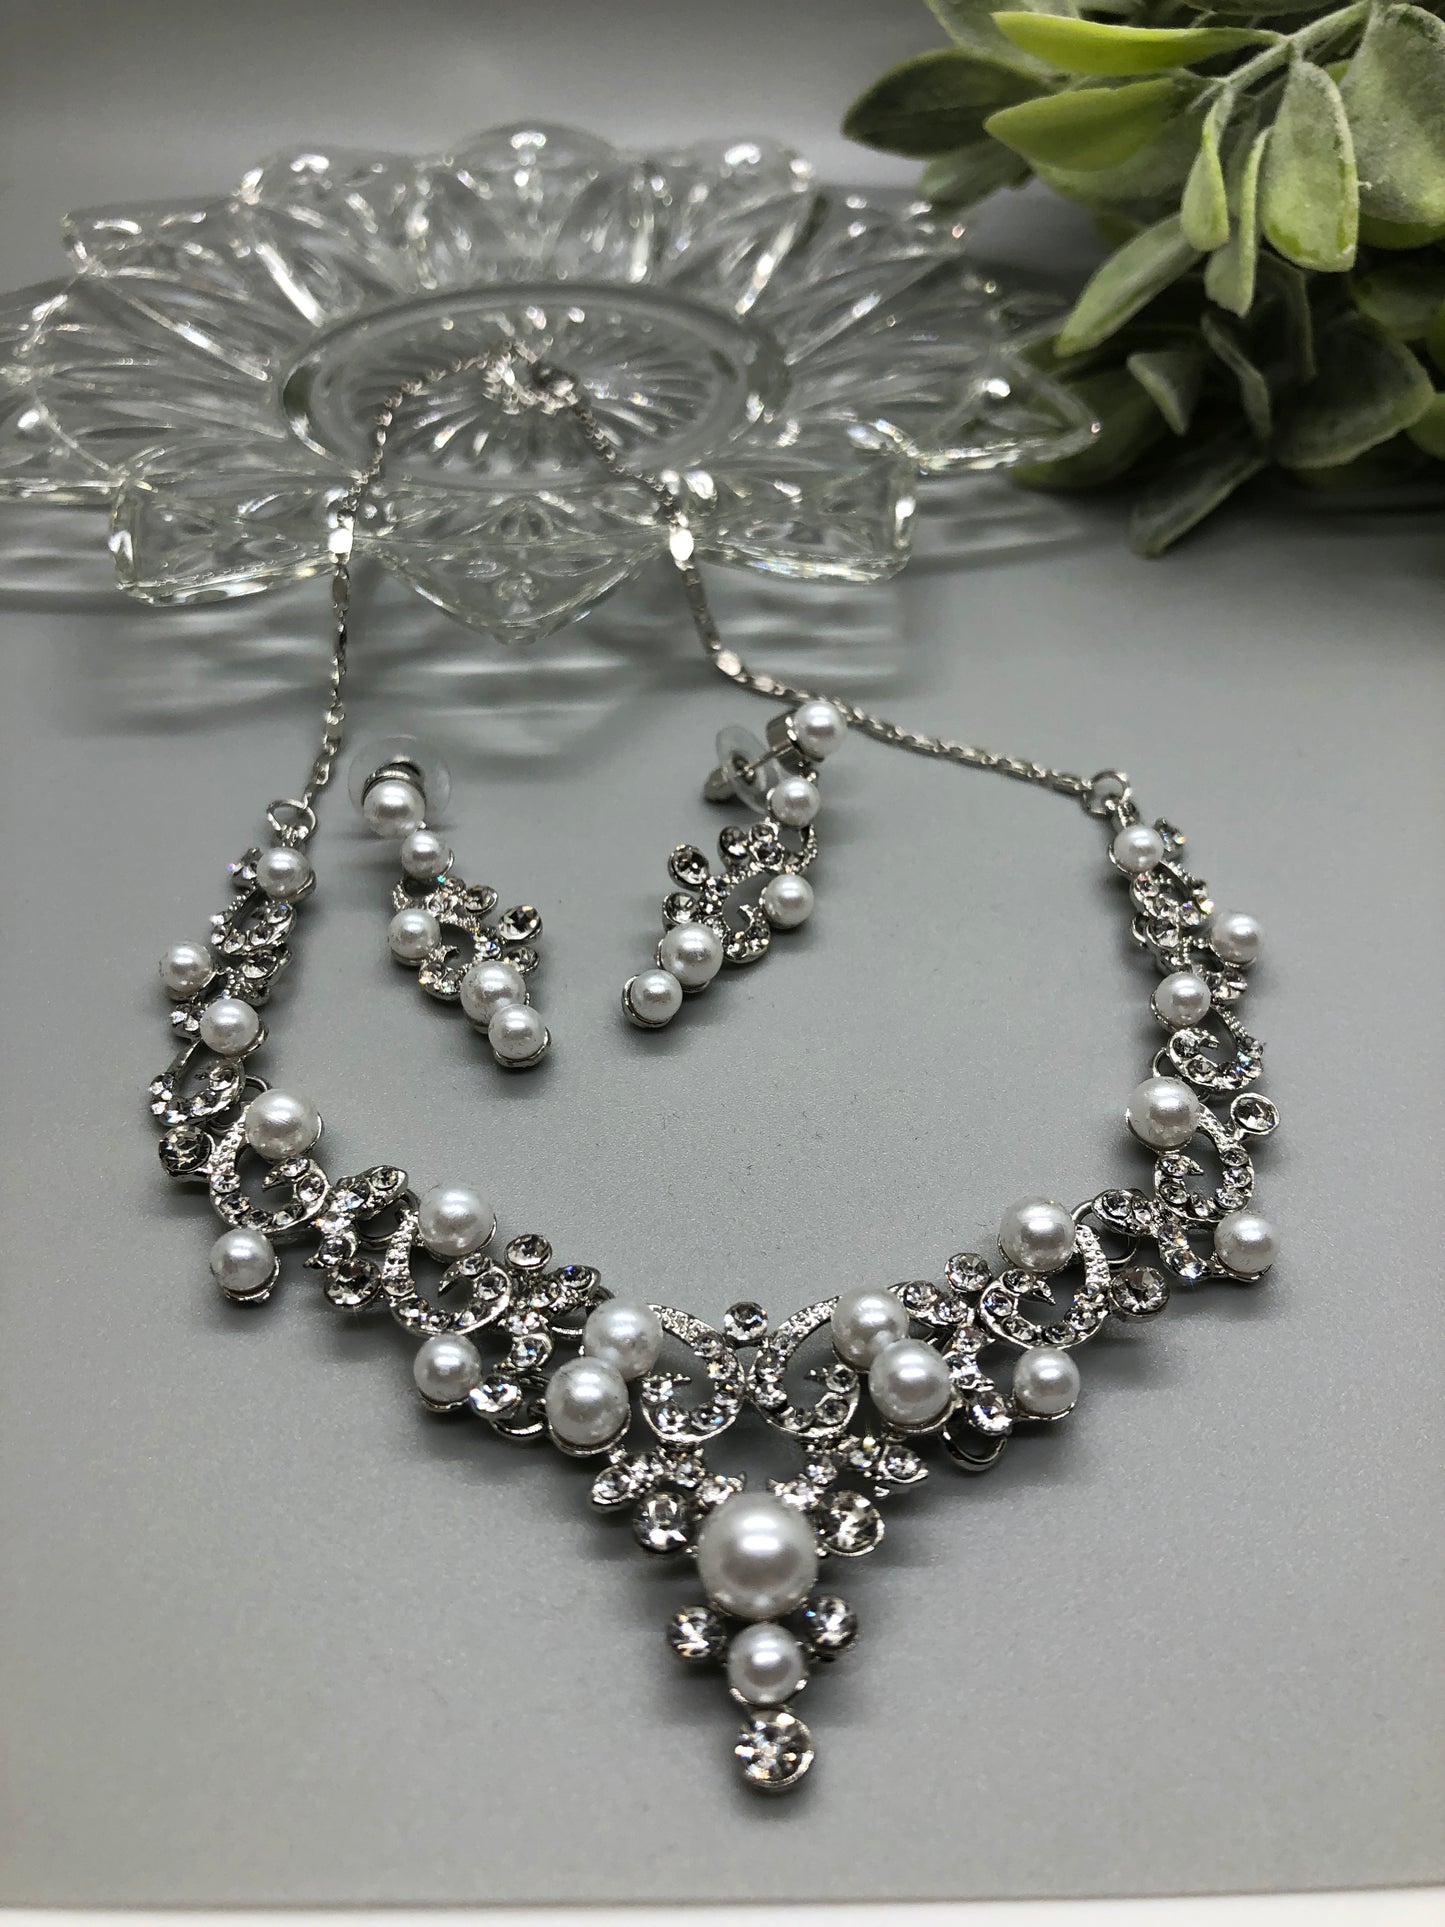 Pearl Crystal Rhinestone Bridal Necklace Earrings Sets Wedding Formal Shower Party Event Accessories